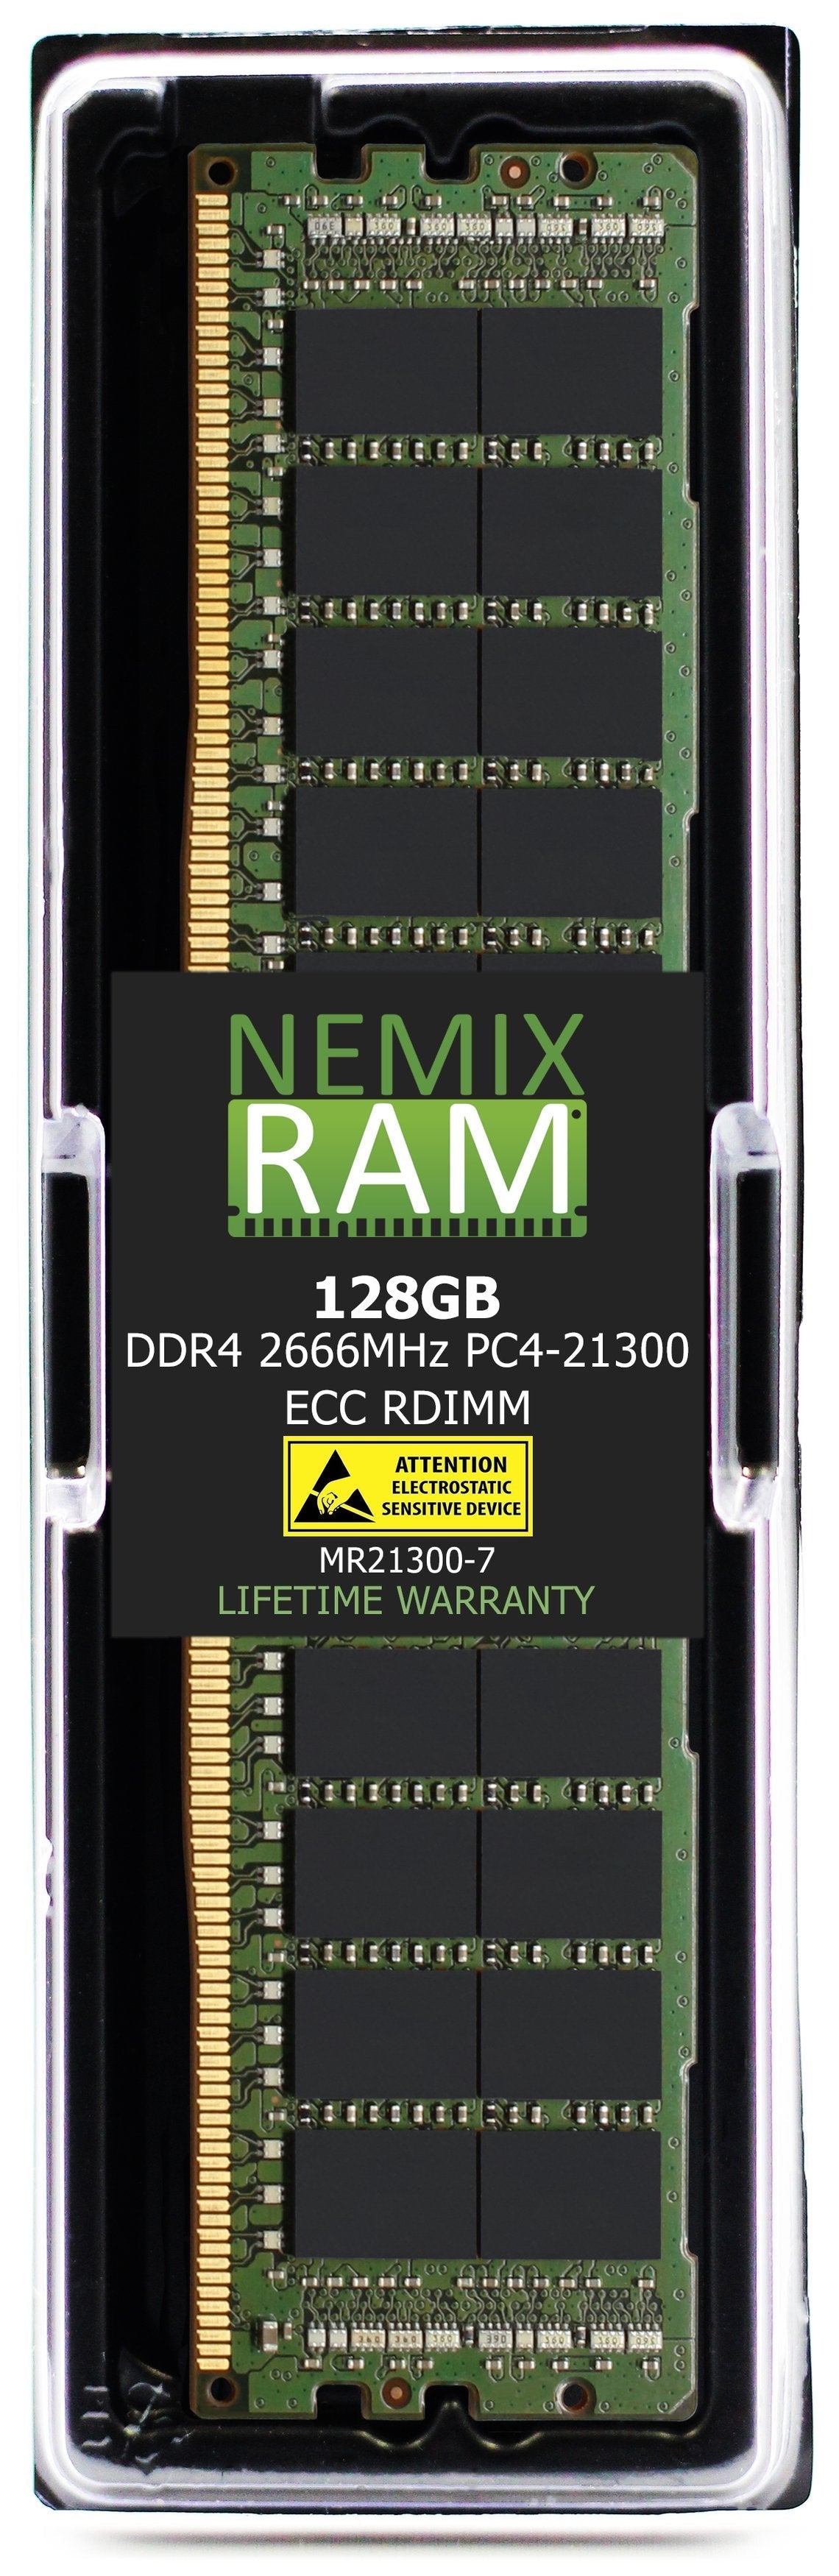 DDR4 2666MHZ PC4-21300 RDIMM 2S2RX4